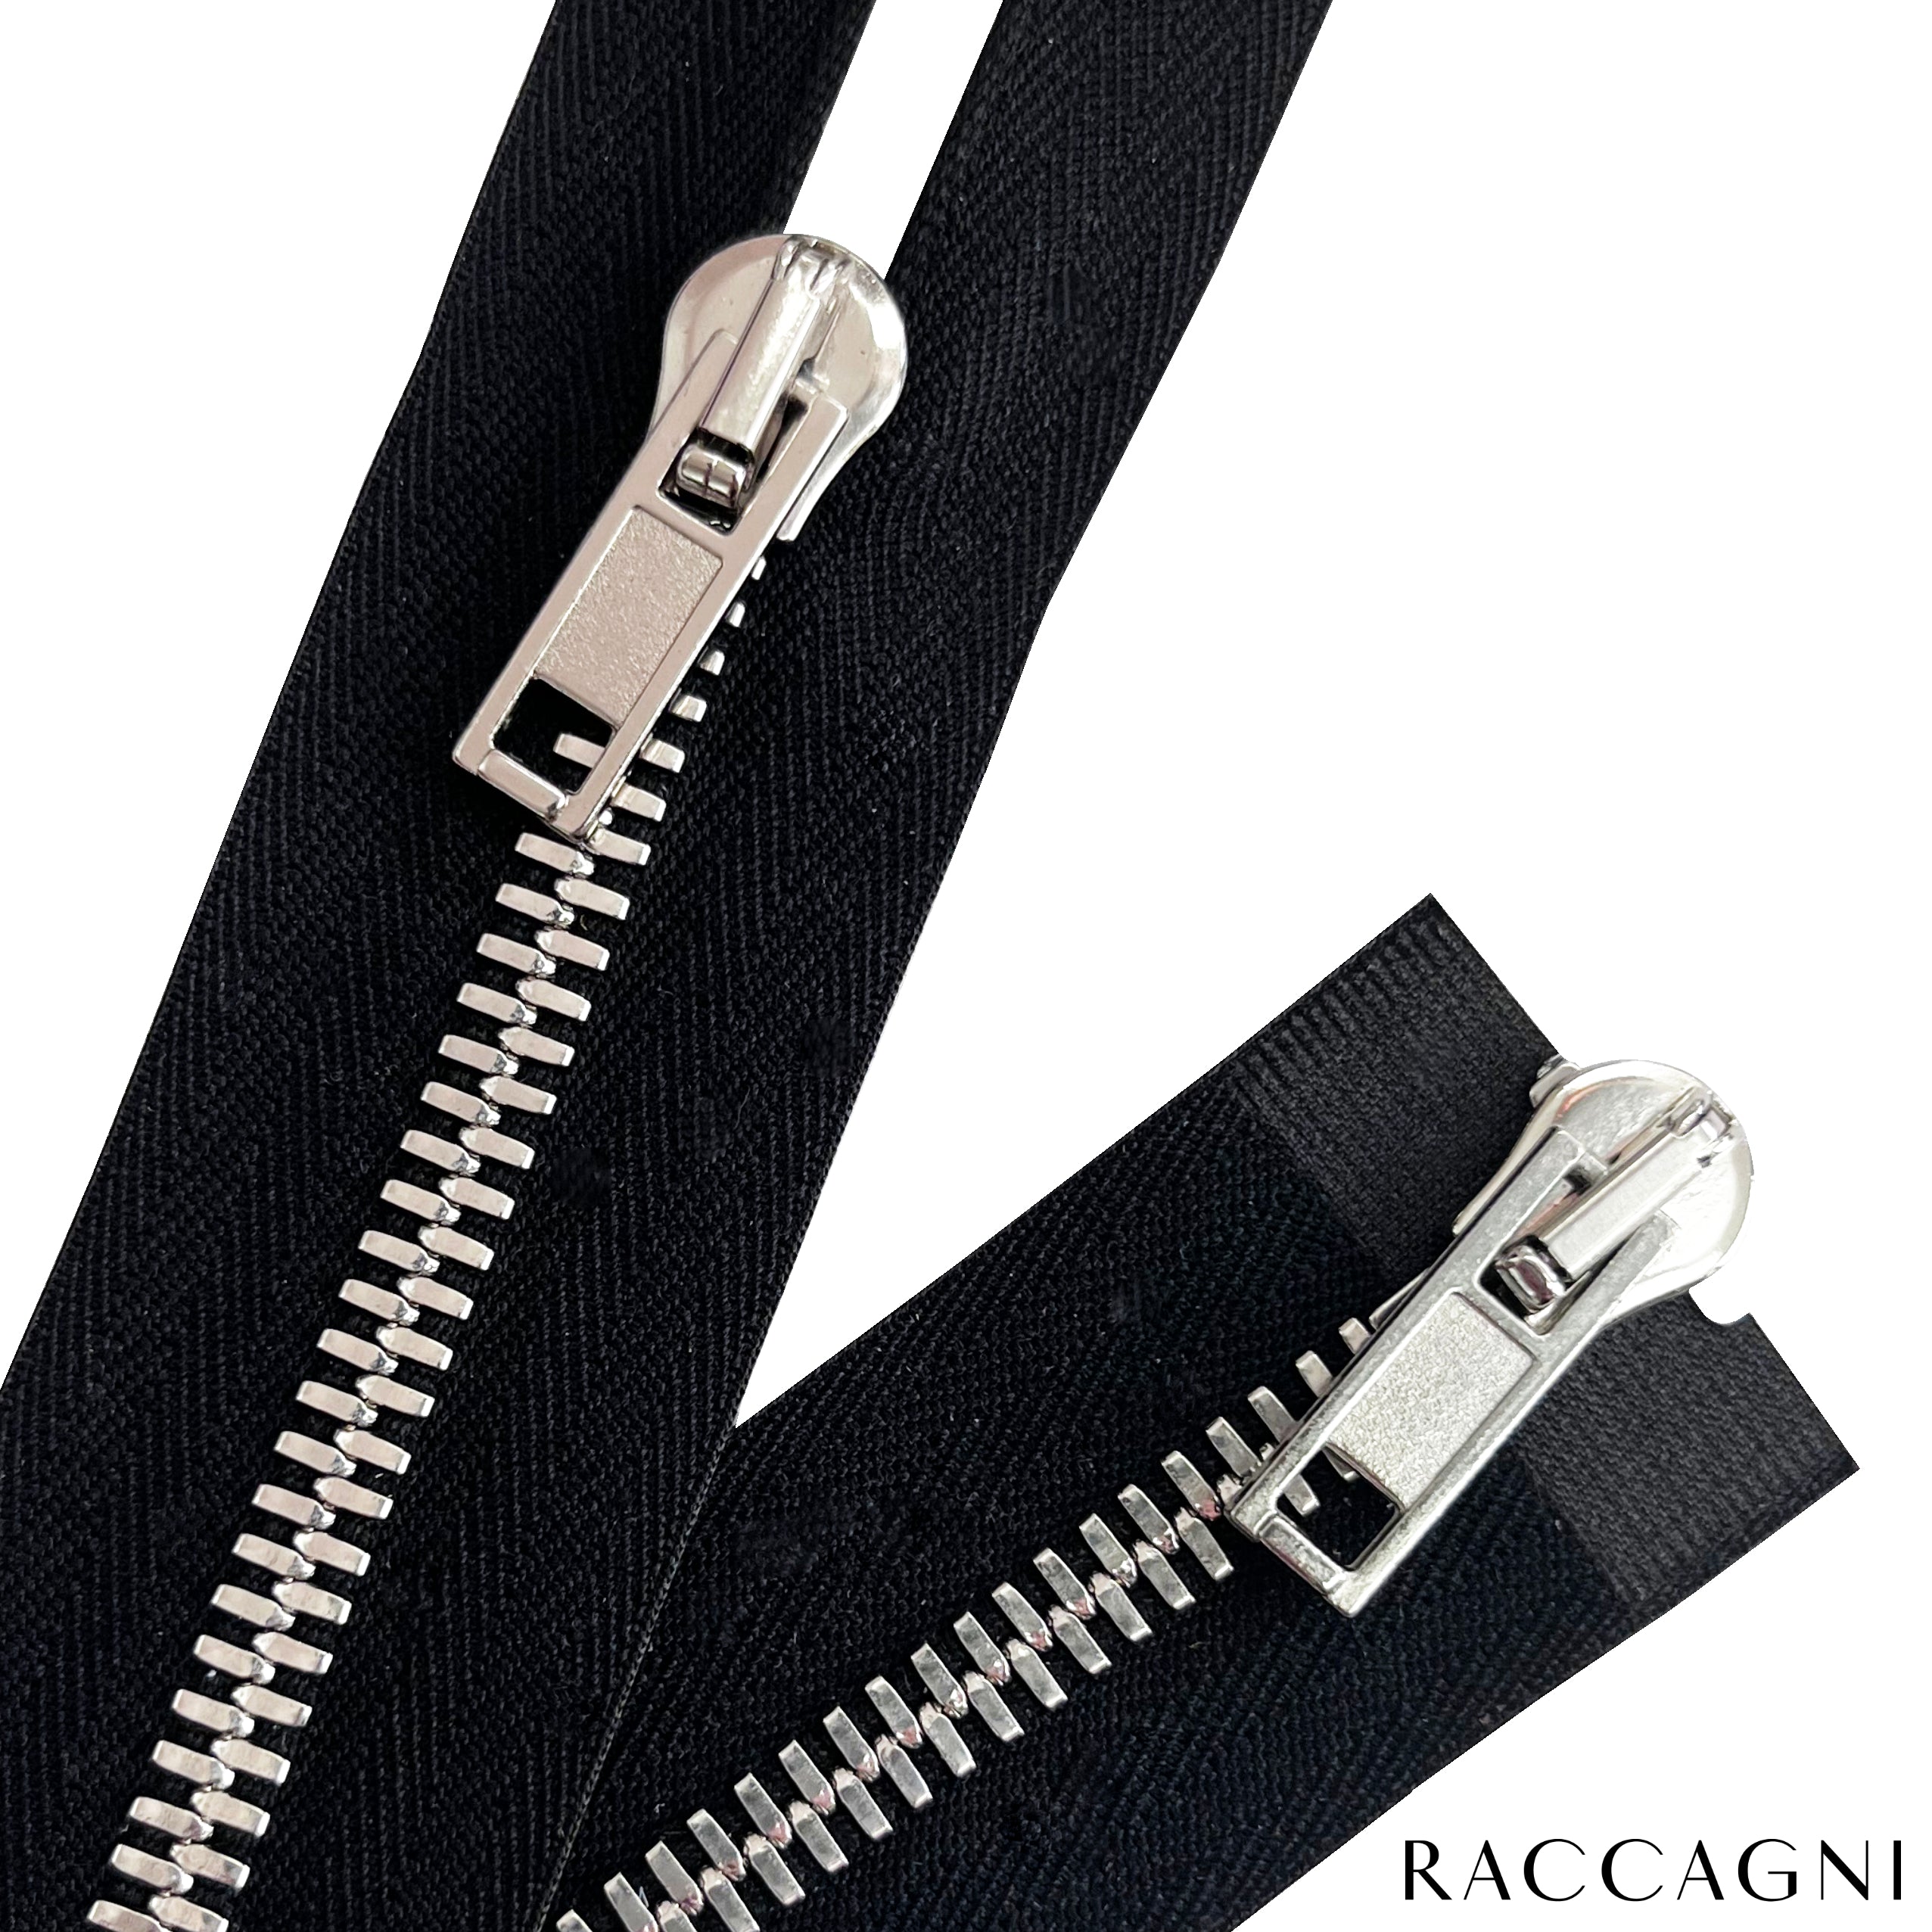 Raccagni COMBY 28 inch Black Tape, Nickel Two-Way Separating Zipper 5M —  ZipUpZipper